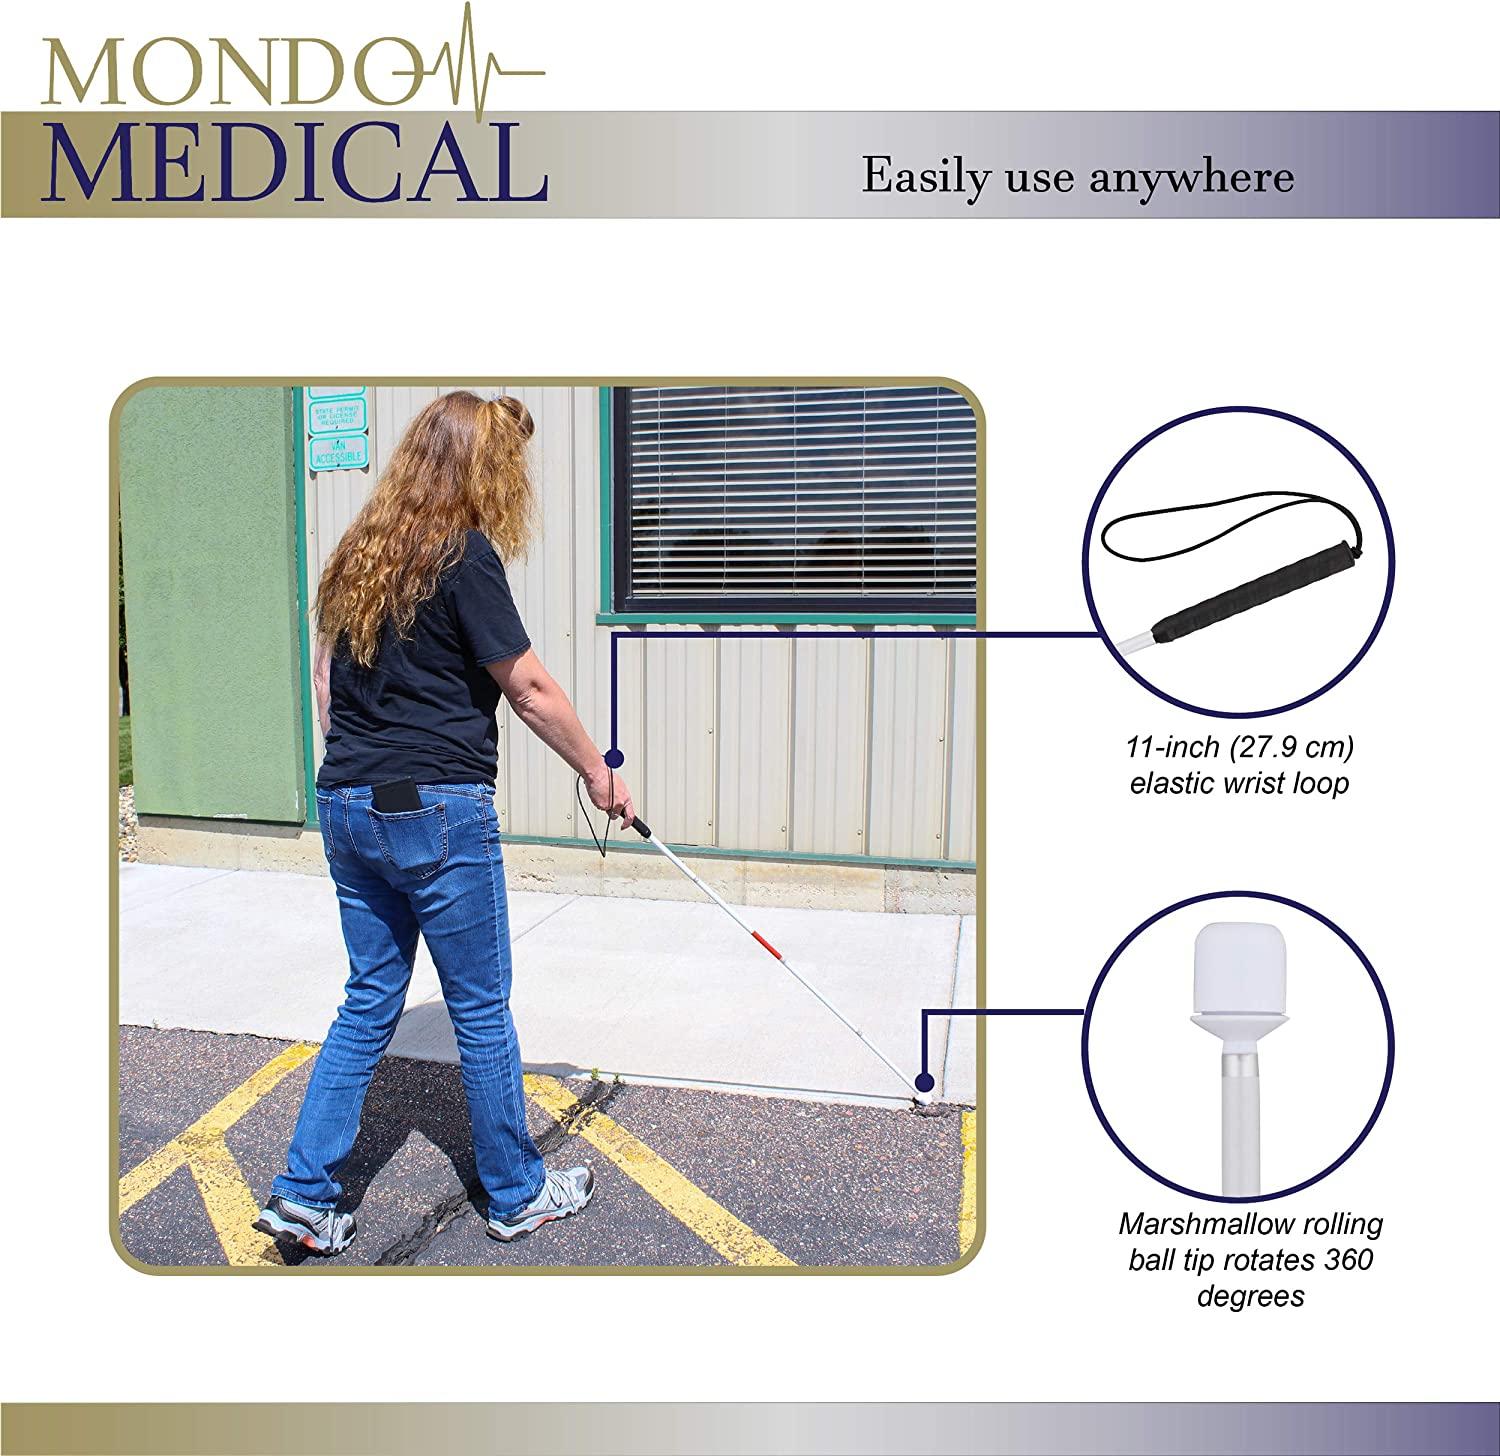 Blind Guide Cane Folding Walking Stick For Vision Impaired And Blind People  NEW